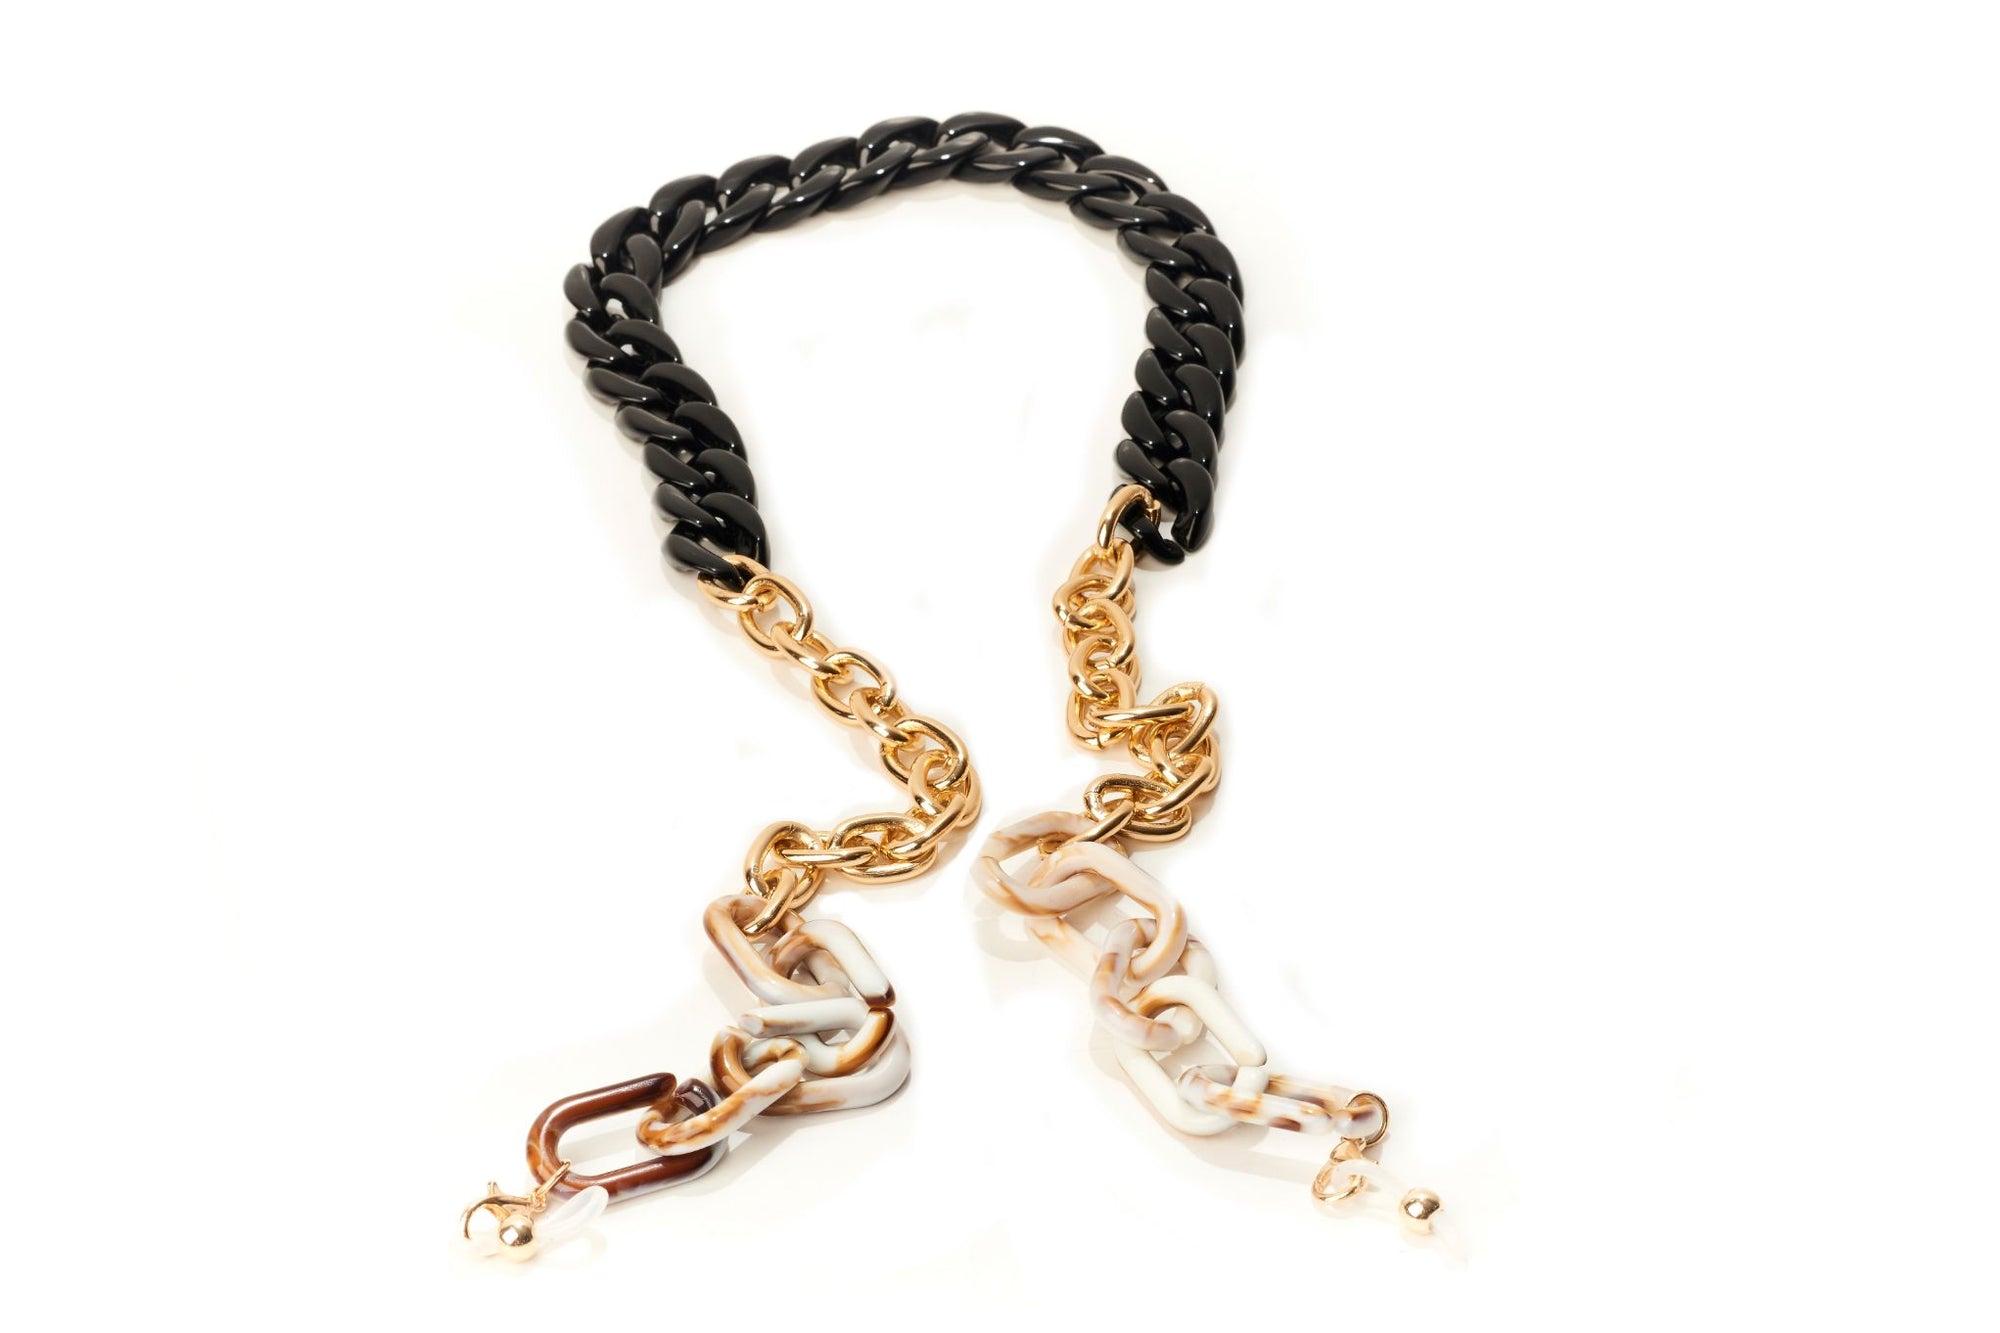 Luxe Black Gold Mask/Glasses Chain